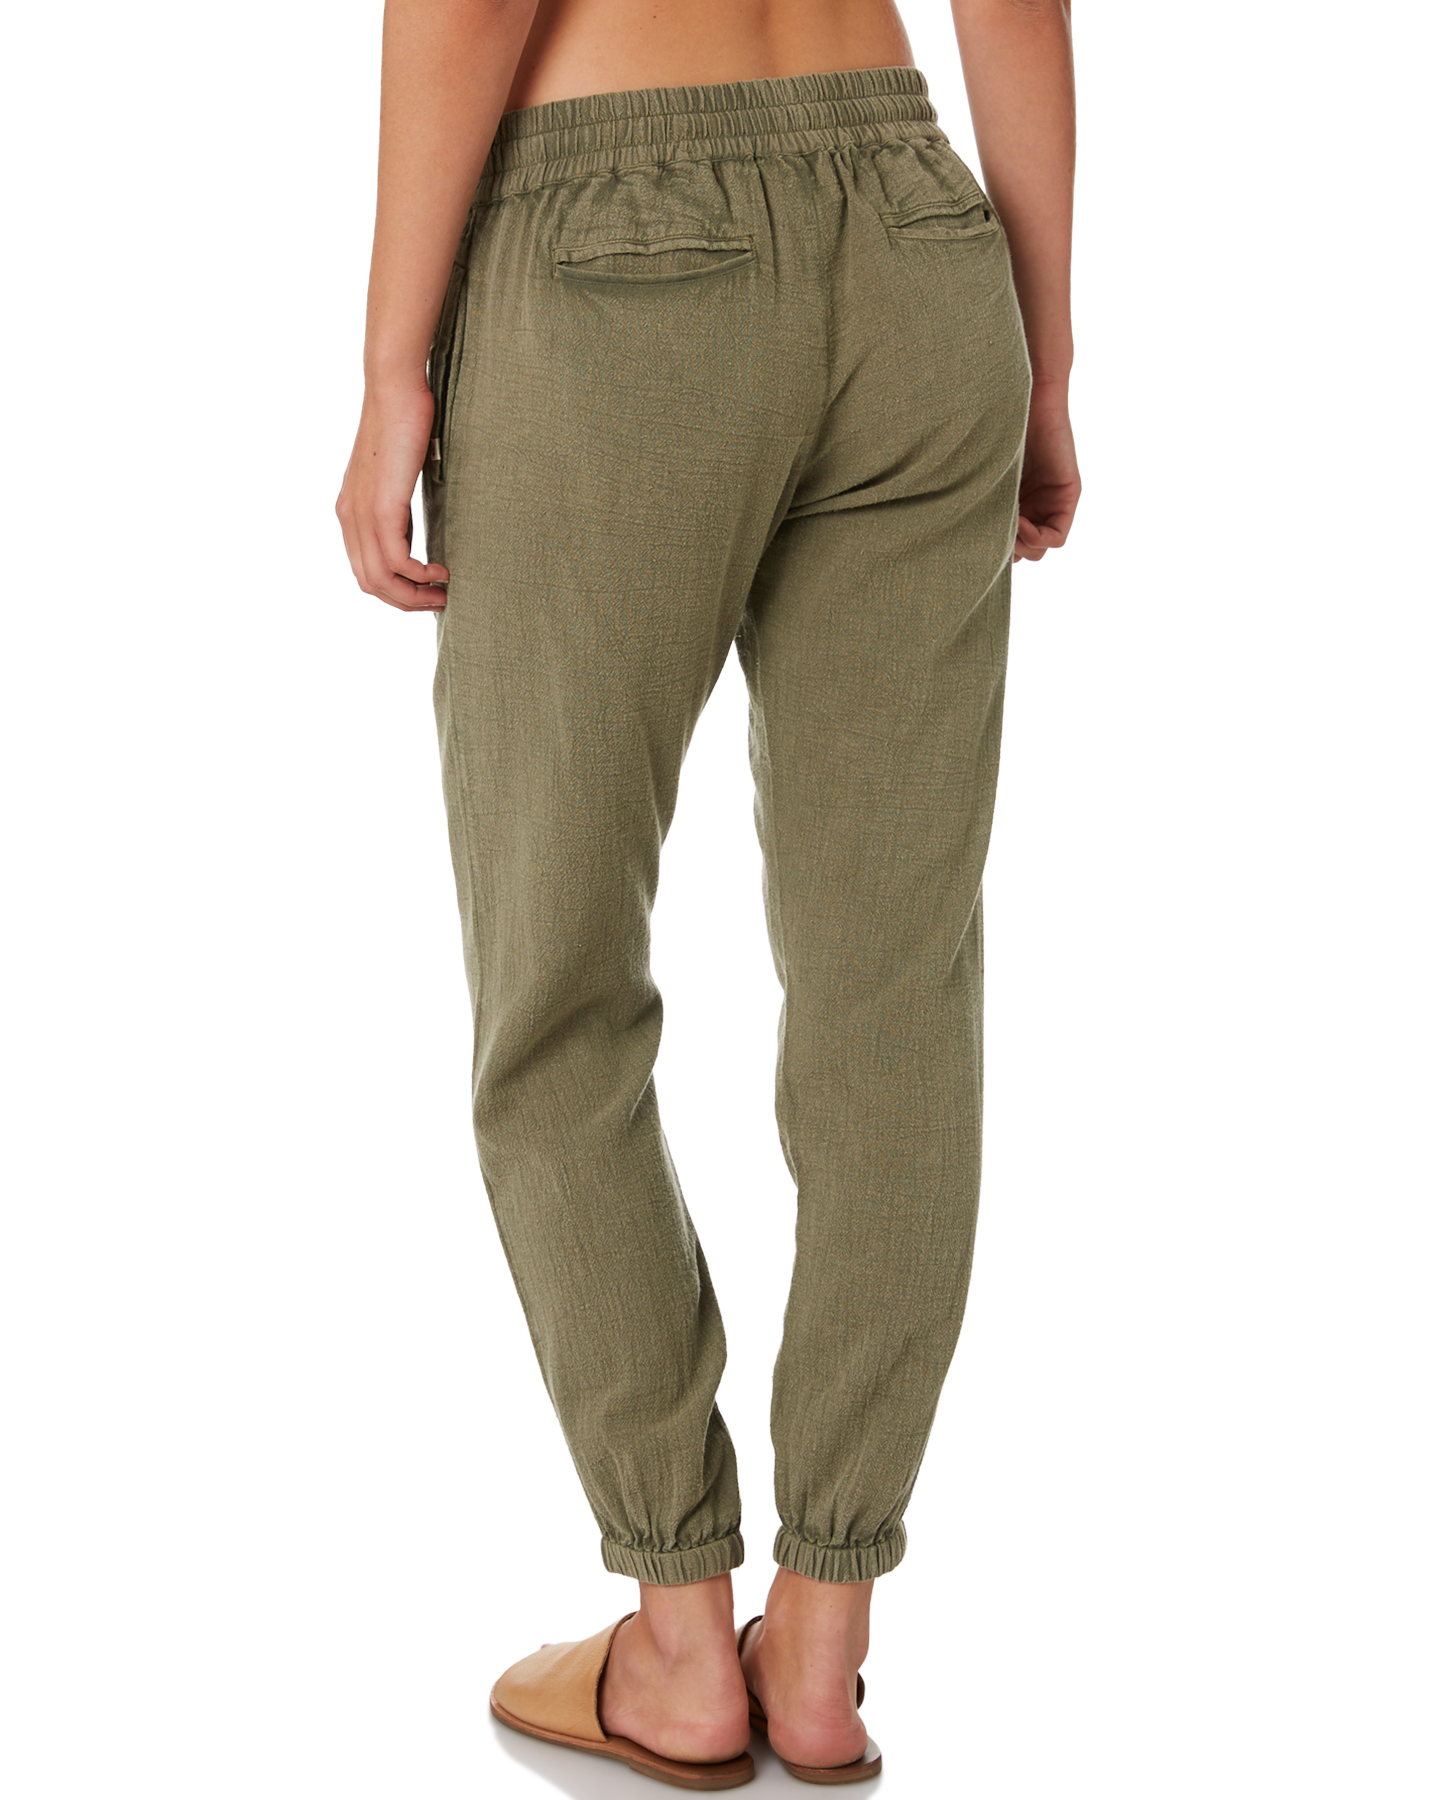 Rip Curl Classic Surf Pant - Army | SurfStitch